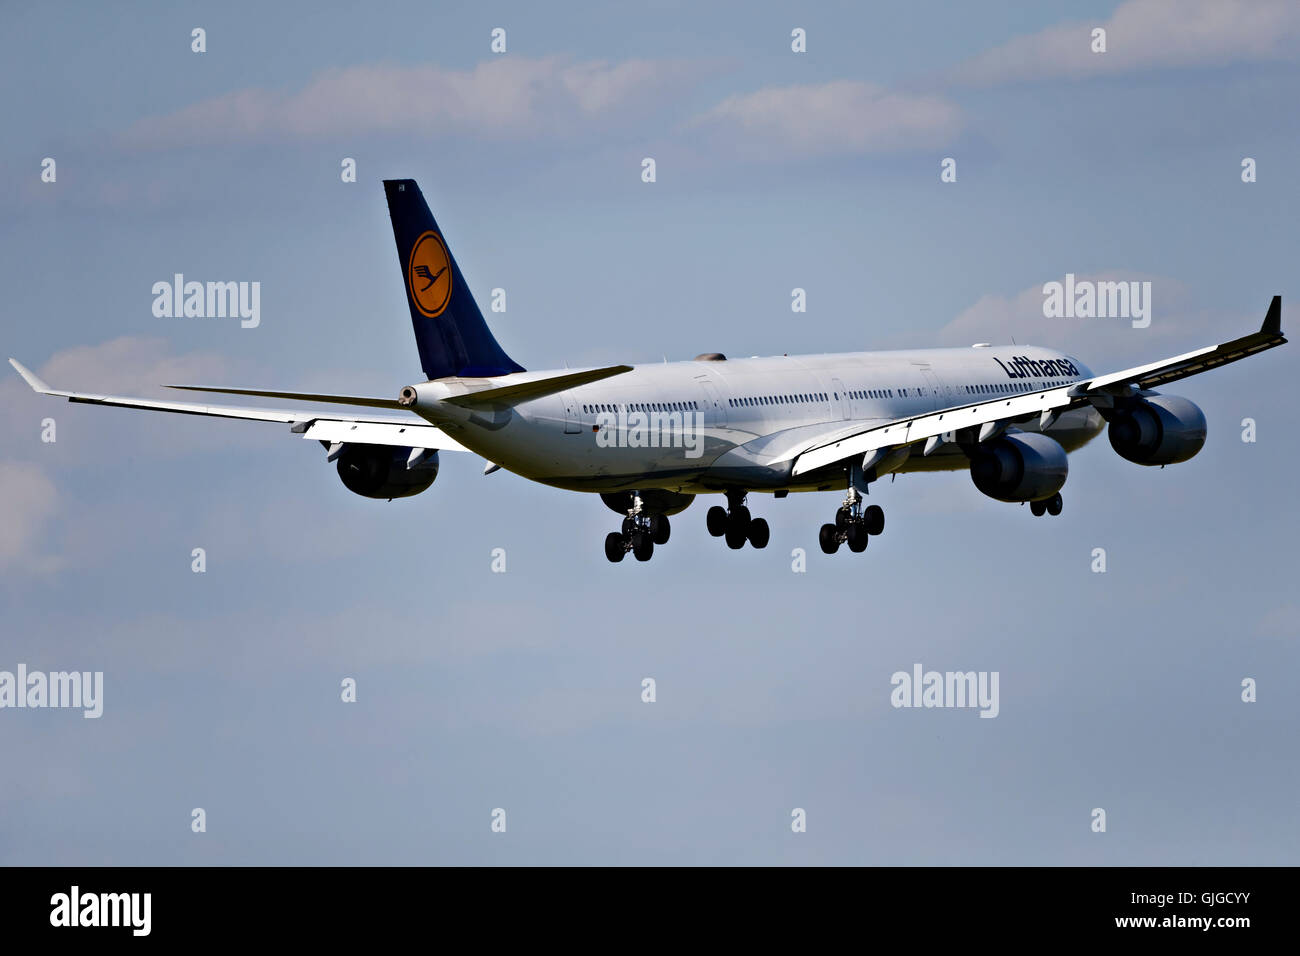 Lufthansa Airbus A340-800 on approach to landing at Franz Josef Strauss Airport, Munich, Upper Bavaria, Germany, Europe. Stock Photo